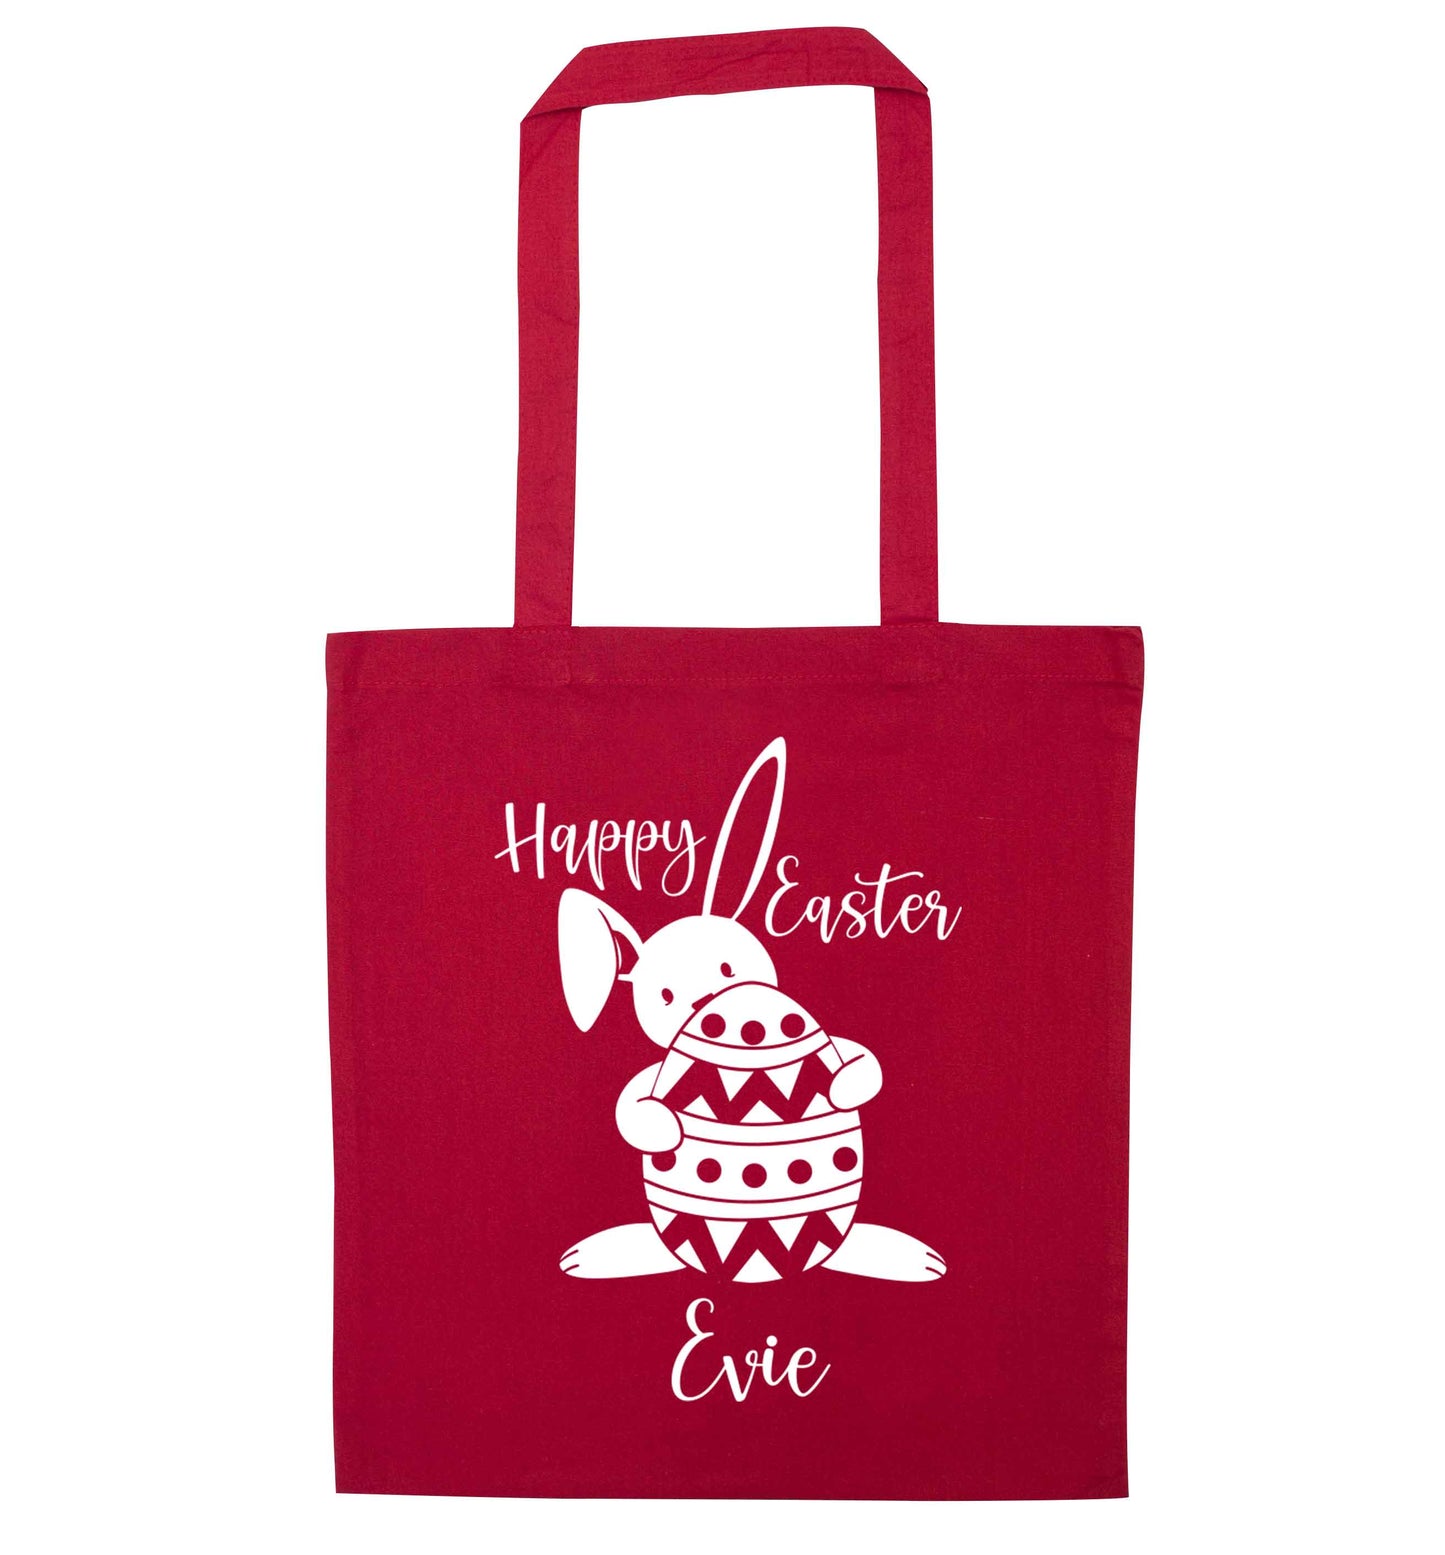 Happy Easter - personalised red tote bag